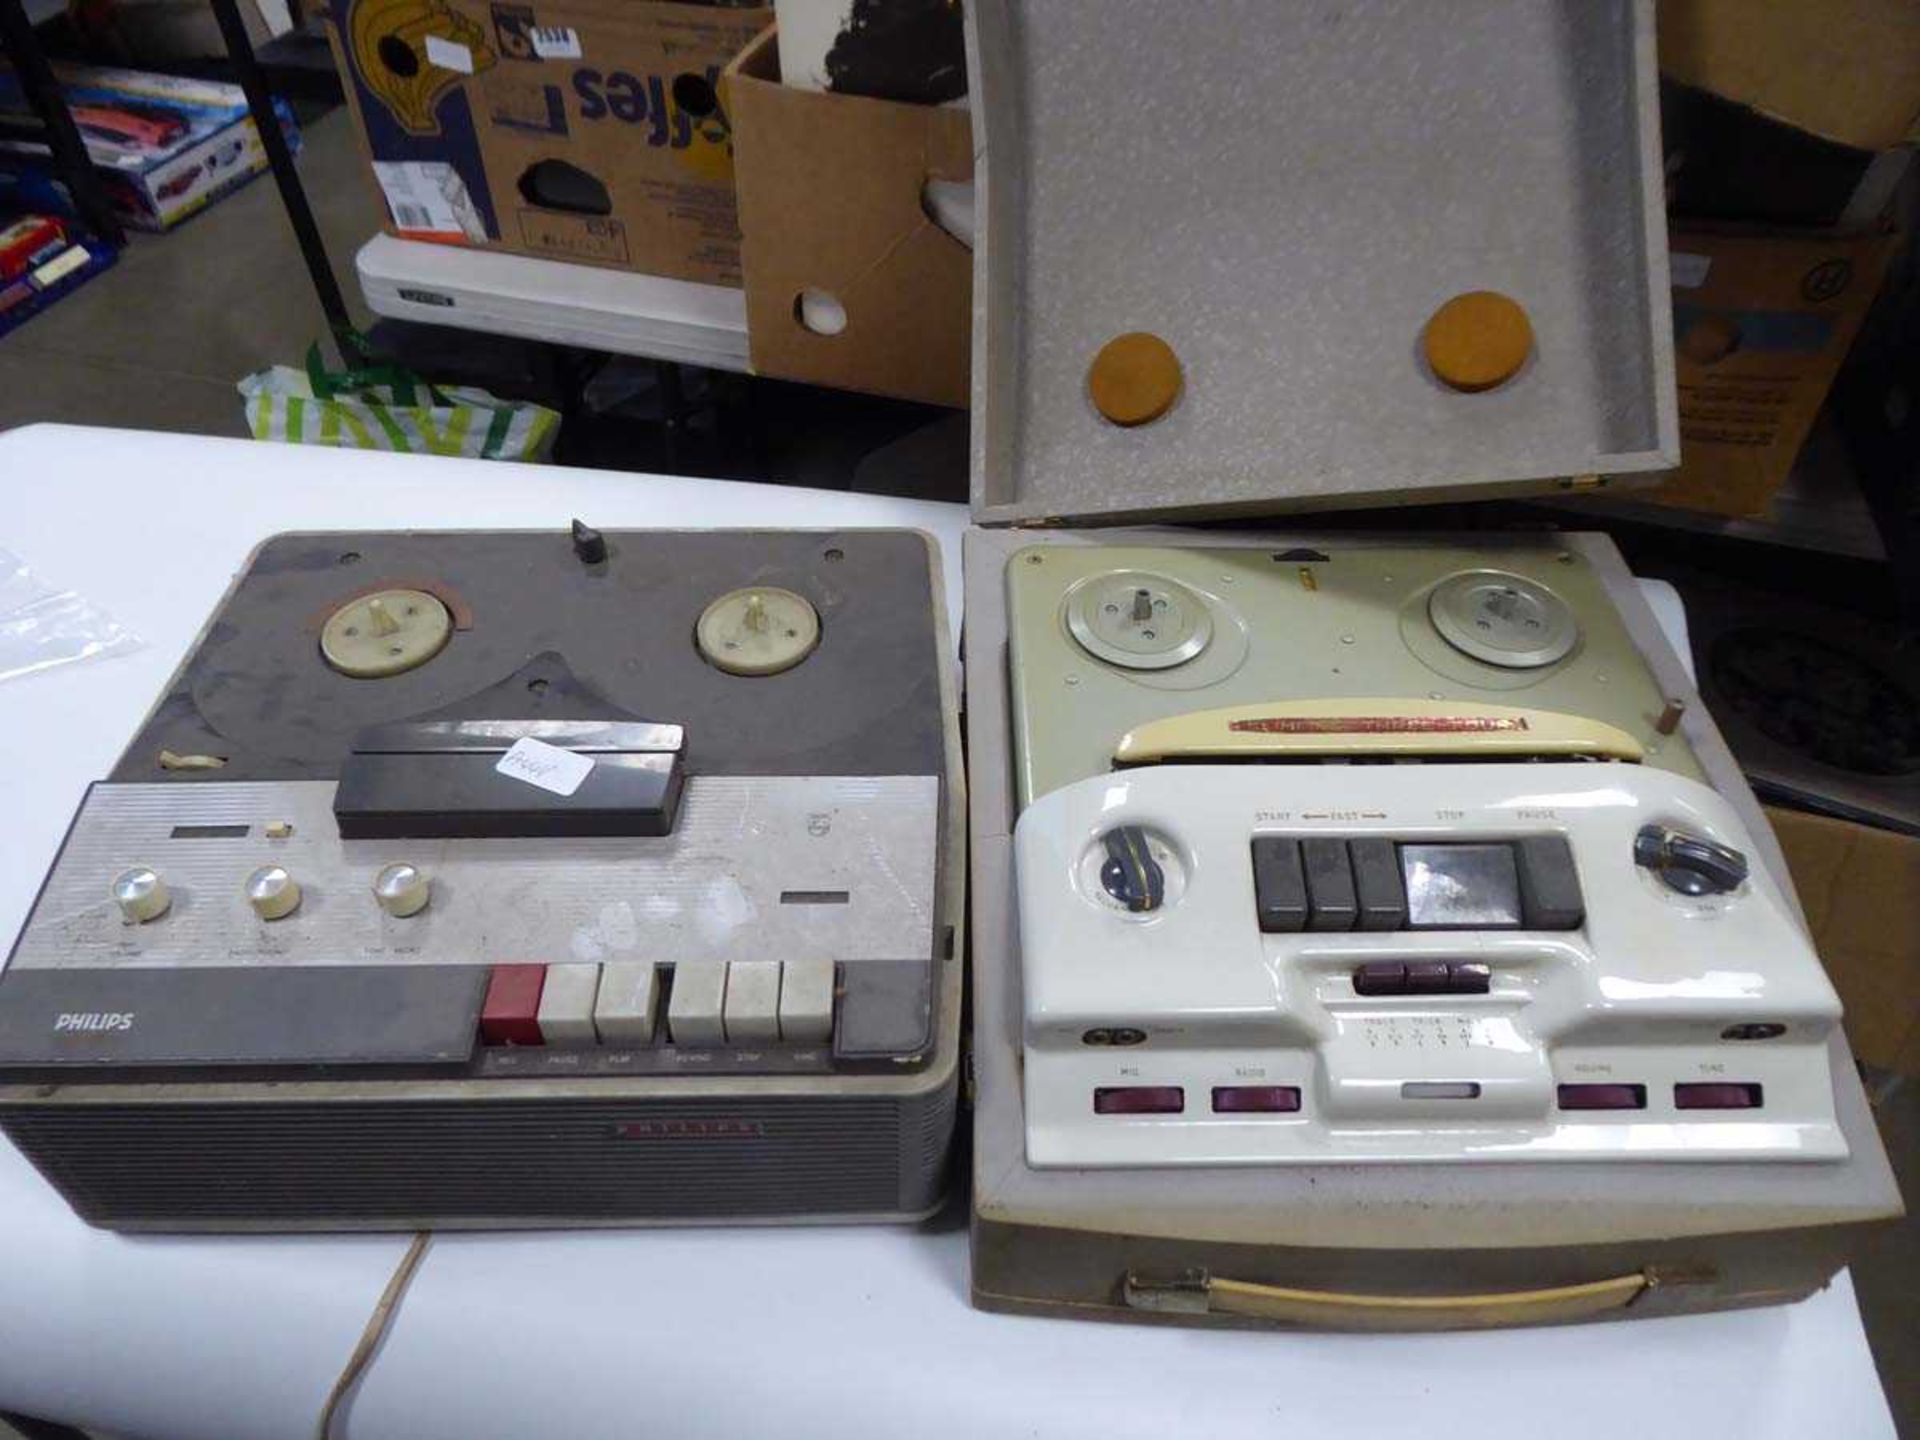 2 Philips reel to reel players